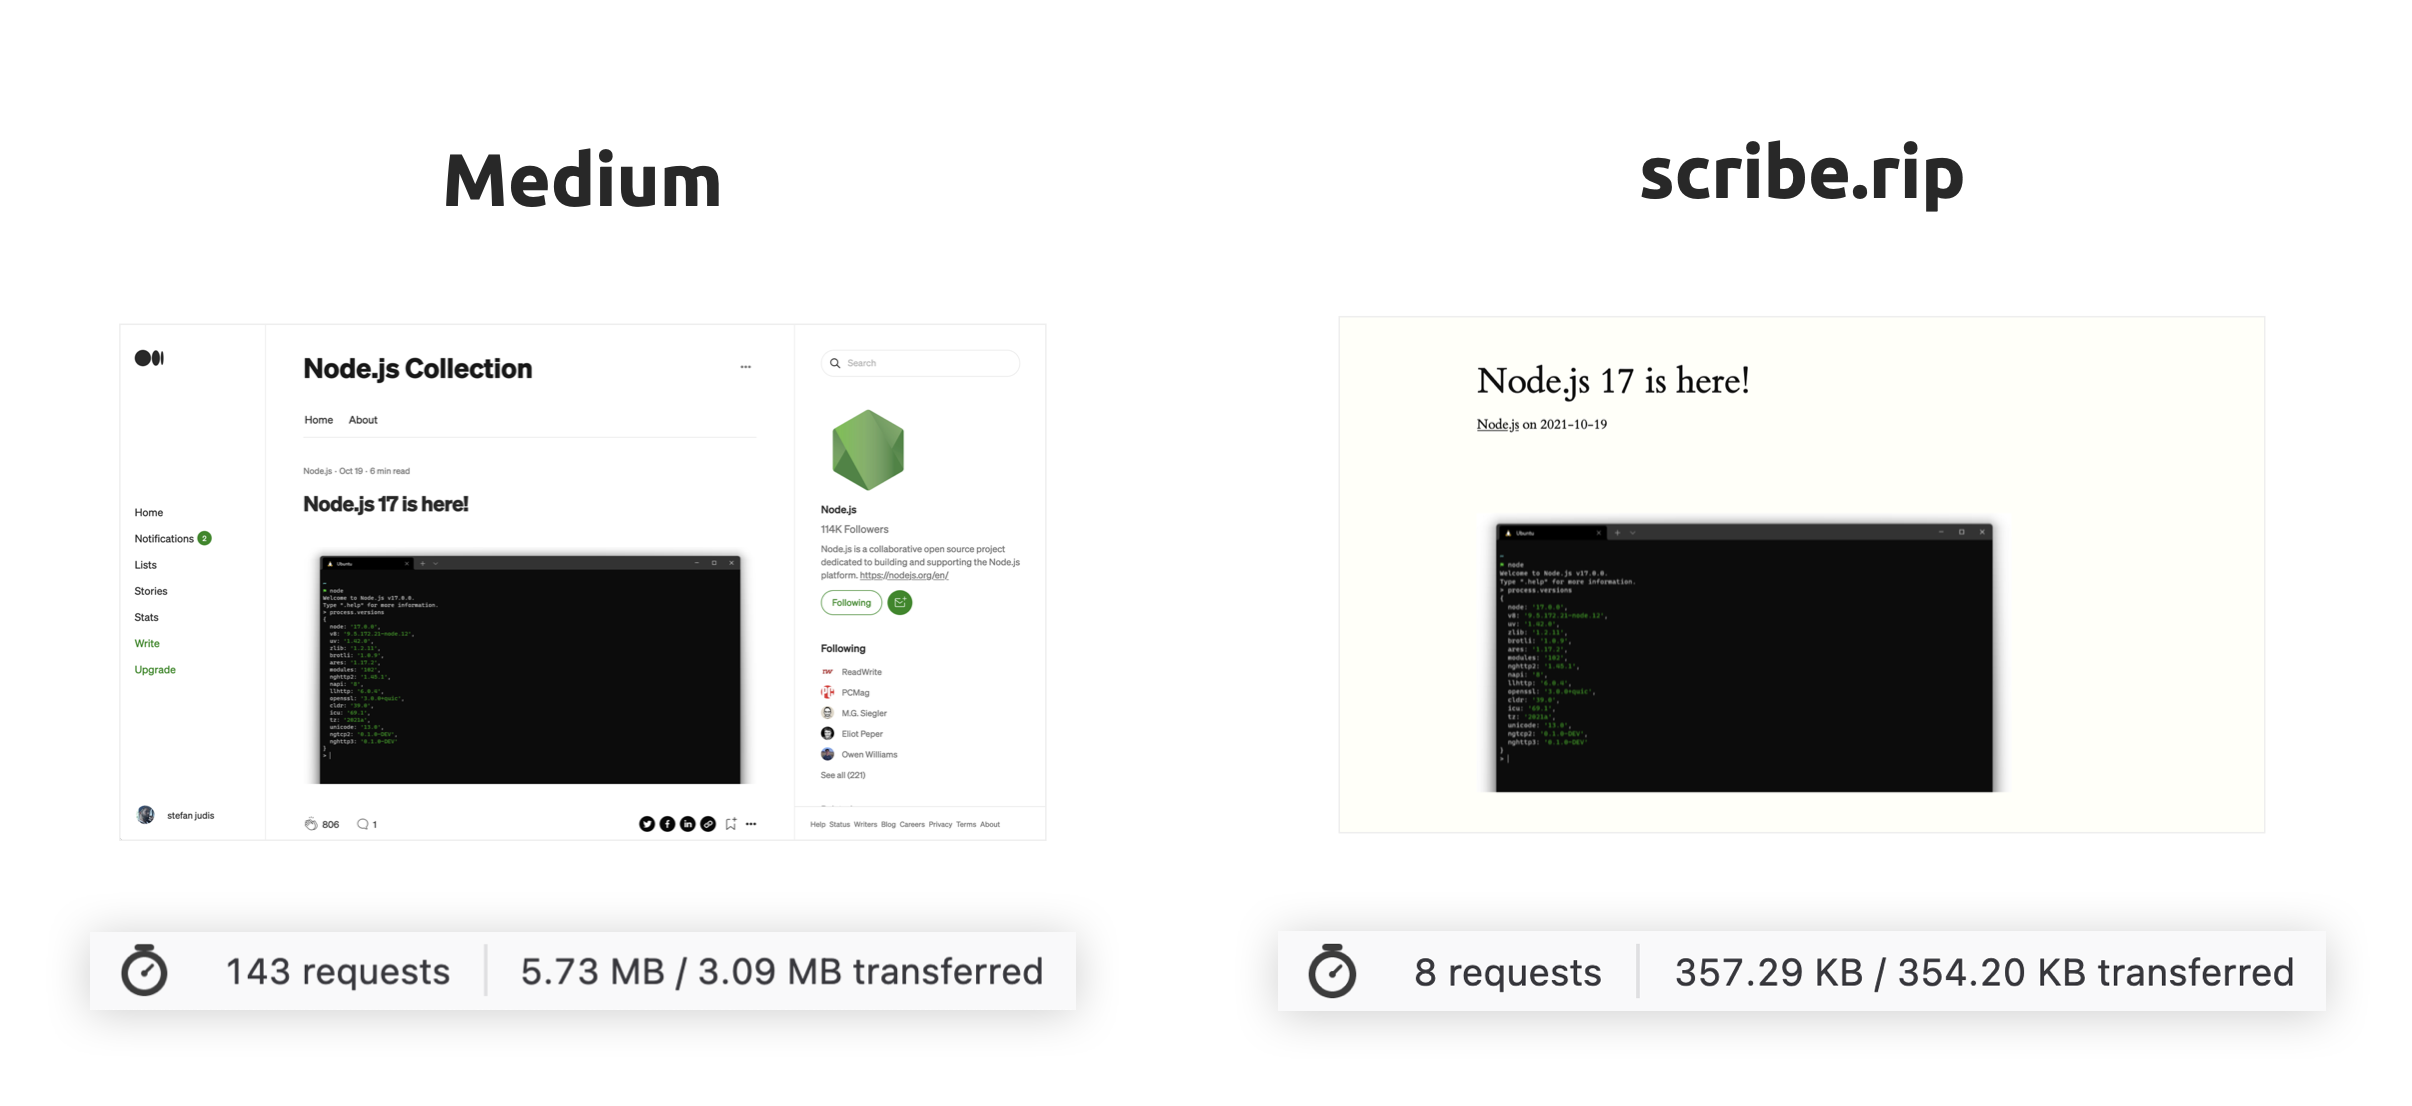 Comparison of Medium and scribe.rip showing that scripe.rip loads a tenth of what medium loads.